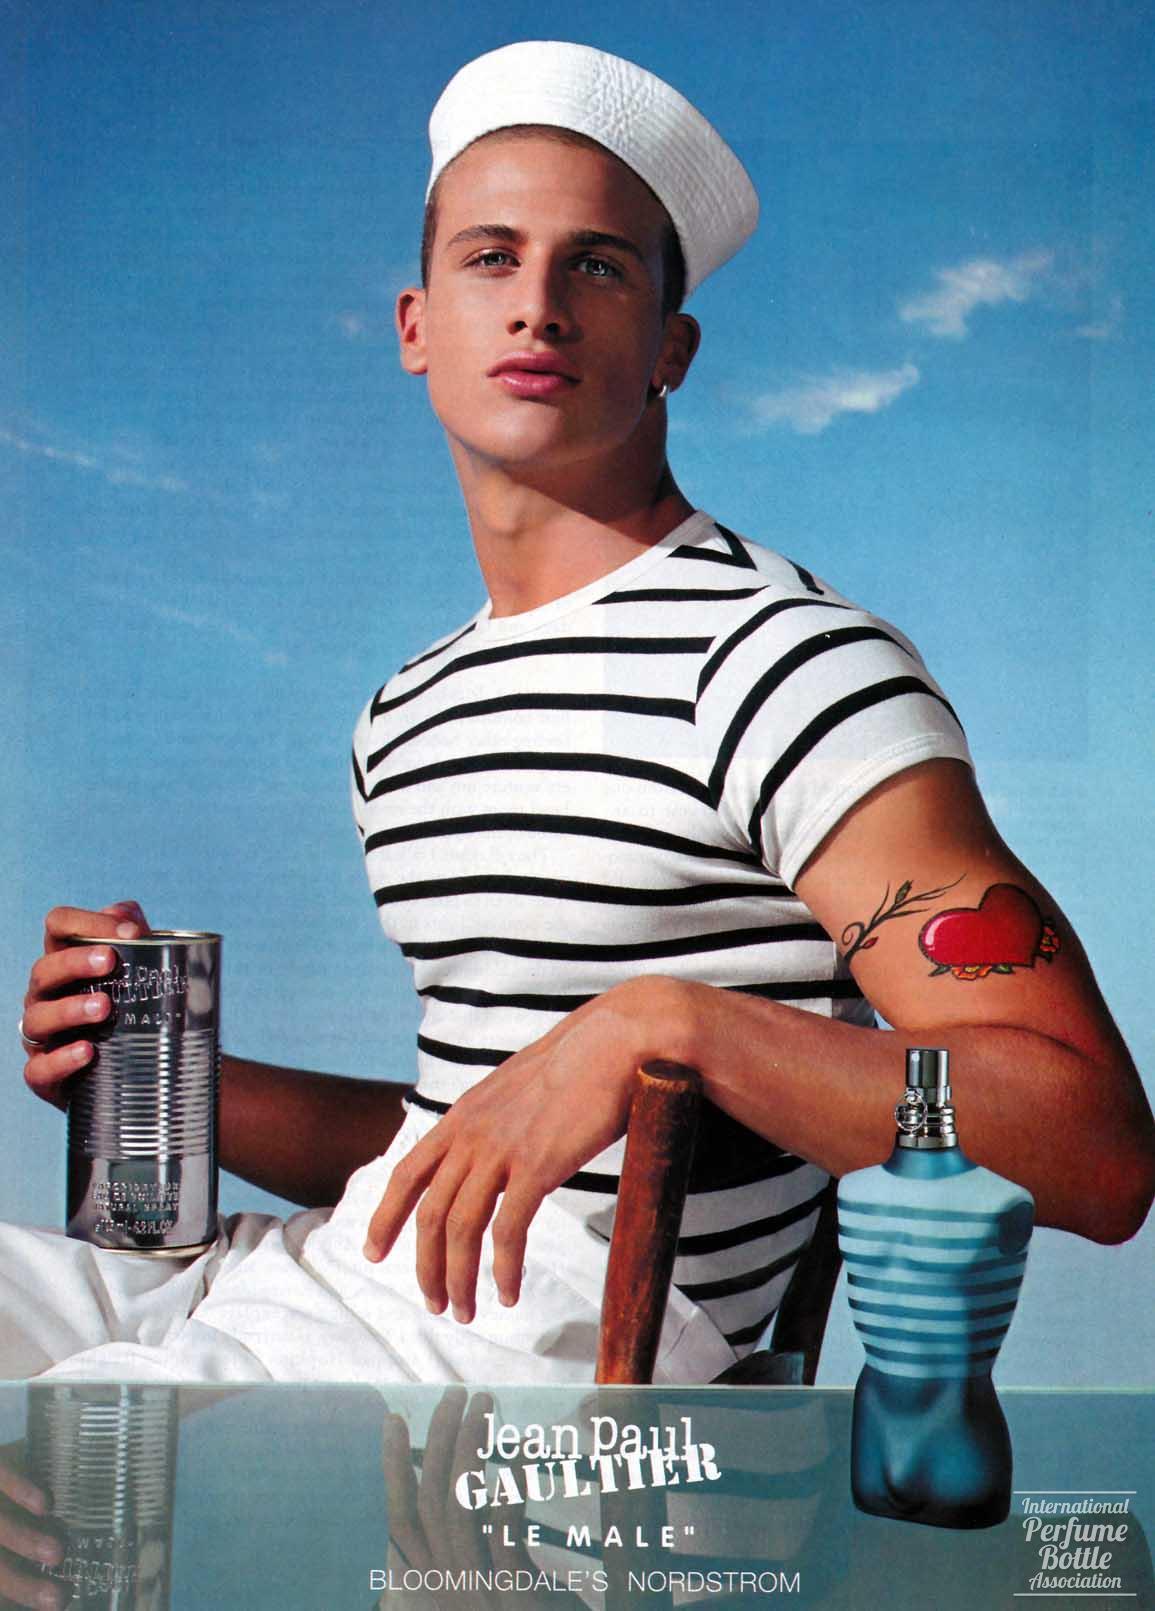 "Le Male" by Gaultier Advertisement - 2000